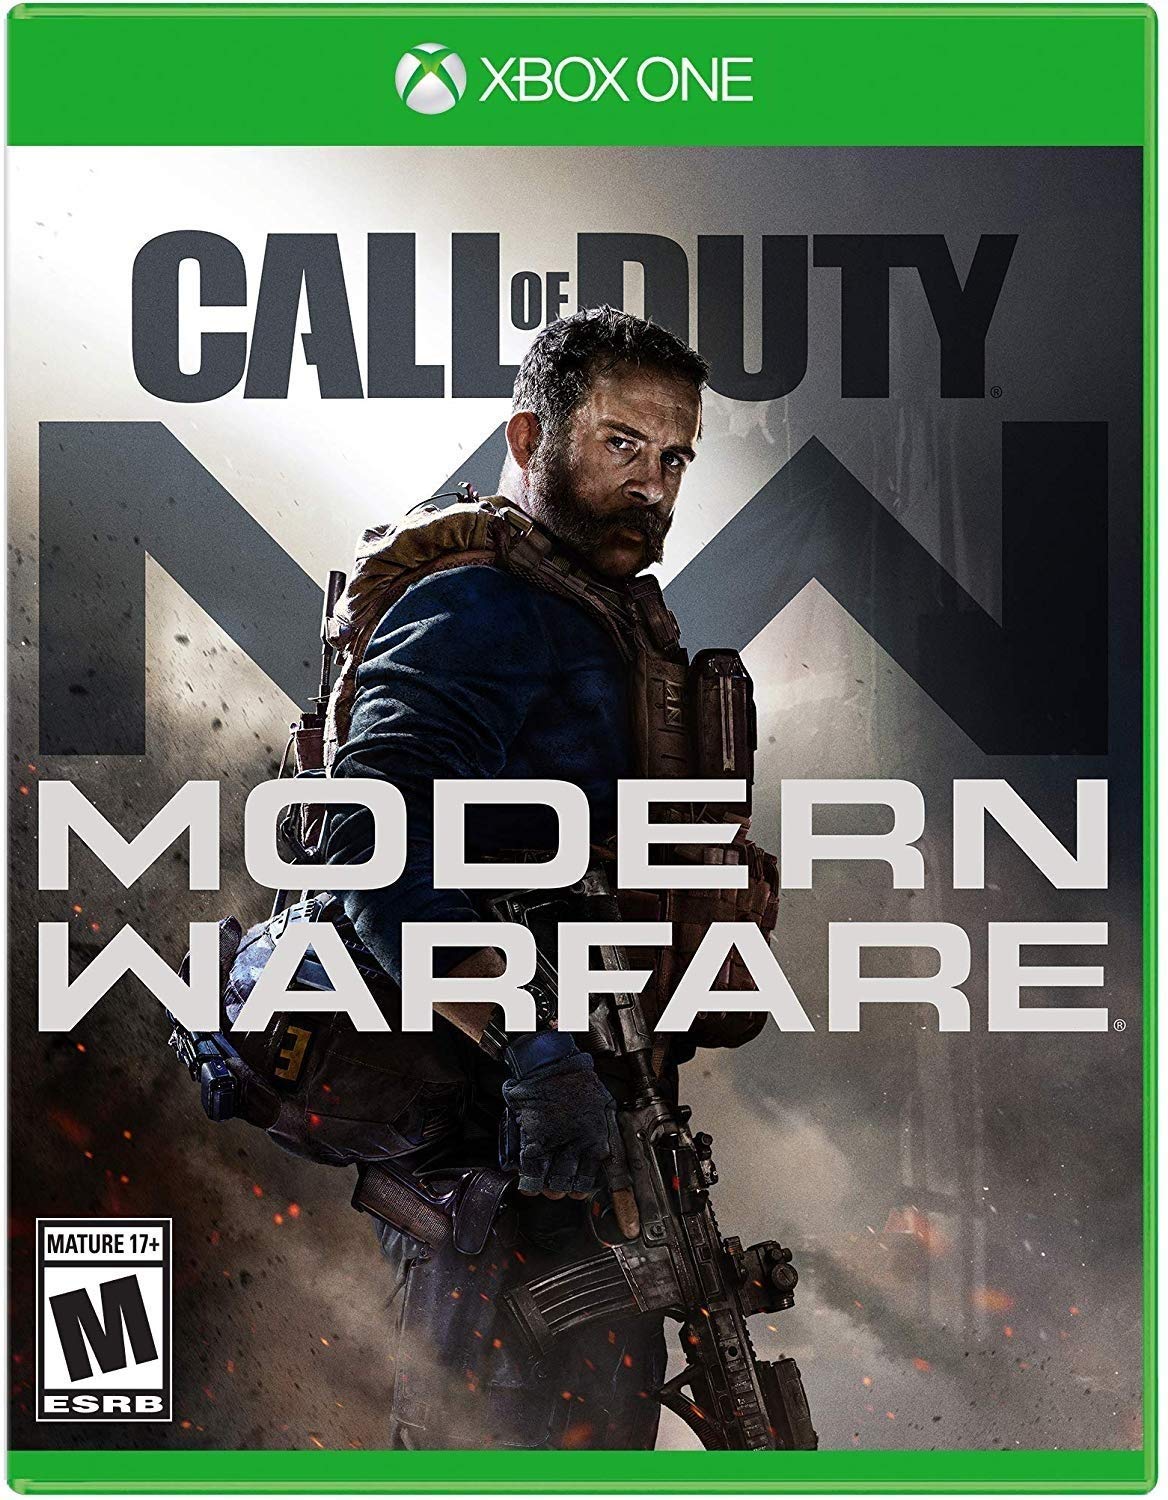 New Games: CALL OF DUTY MODERN WARFARE (2019) - PC, PS4, Xbox One | The